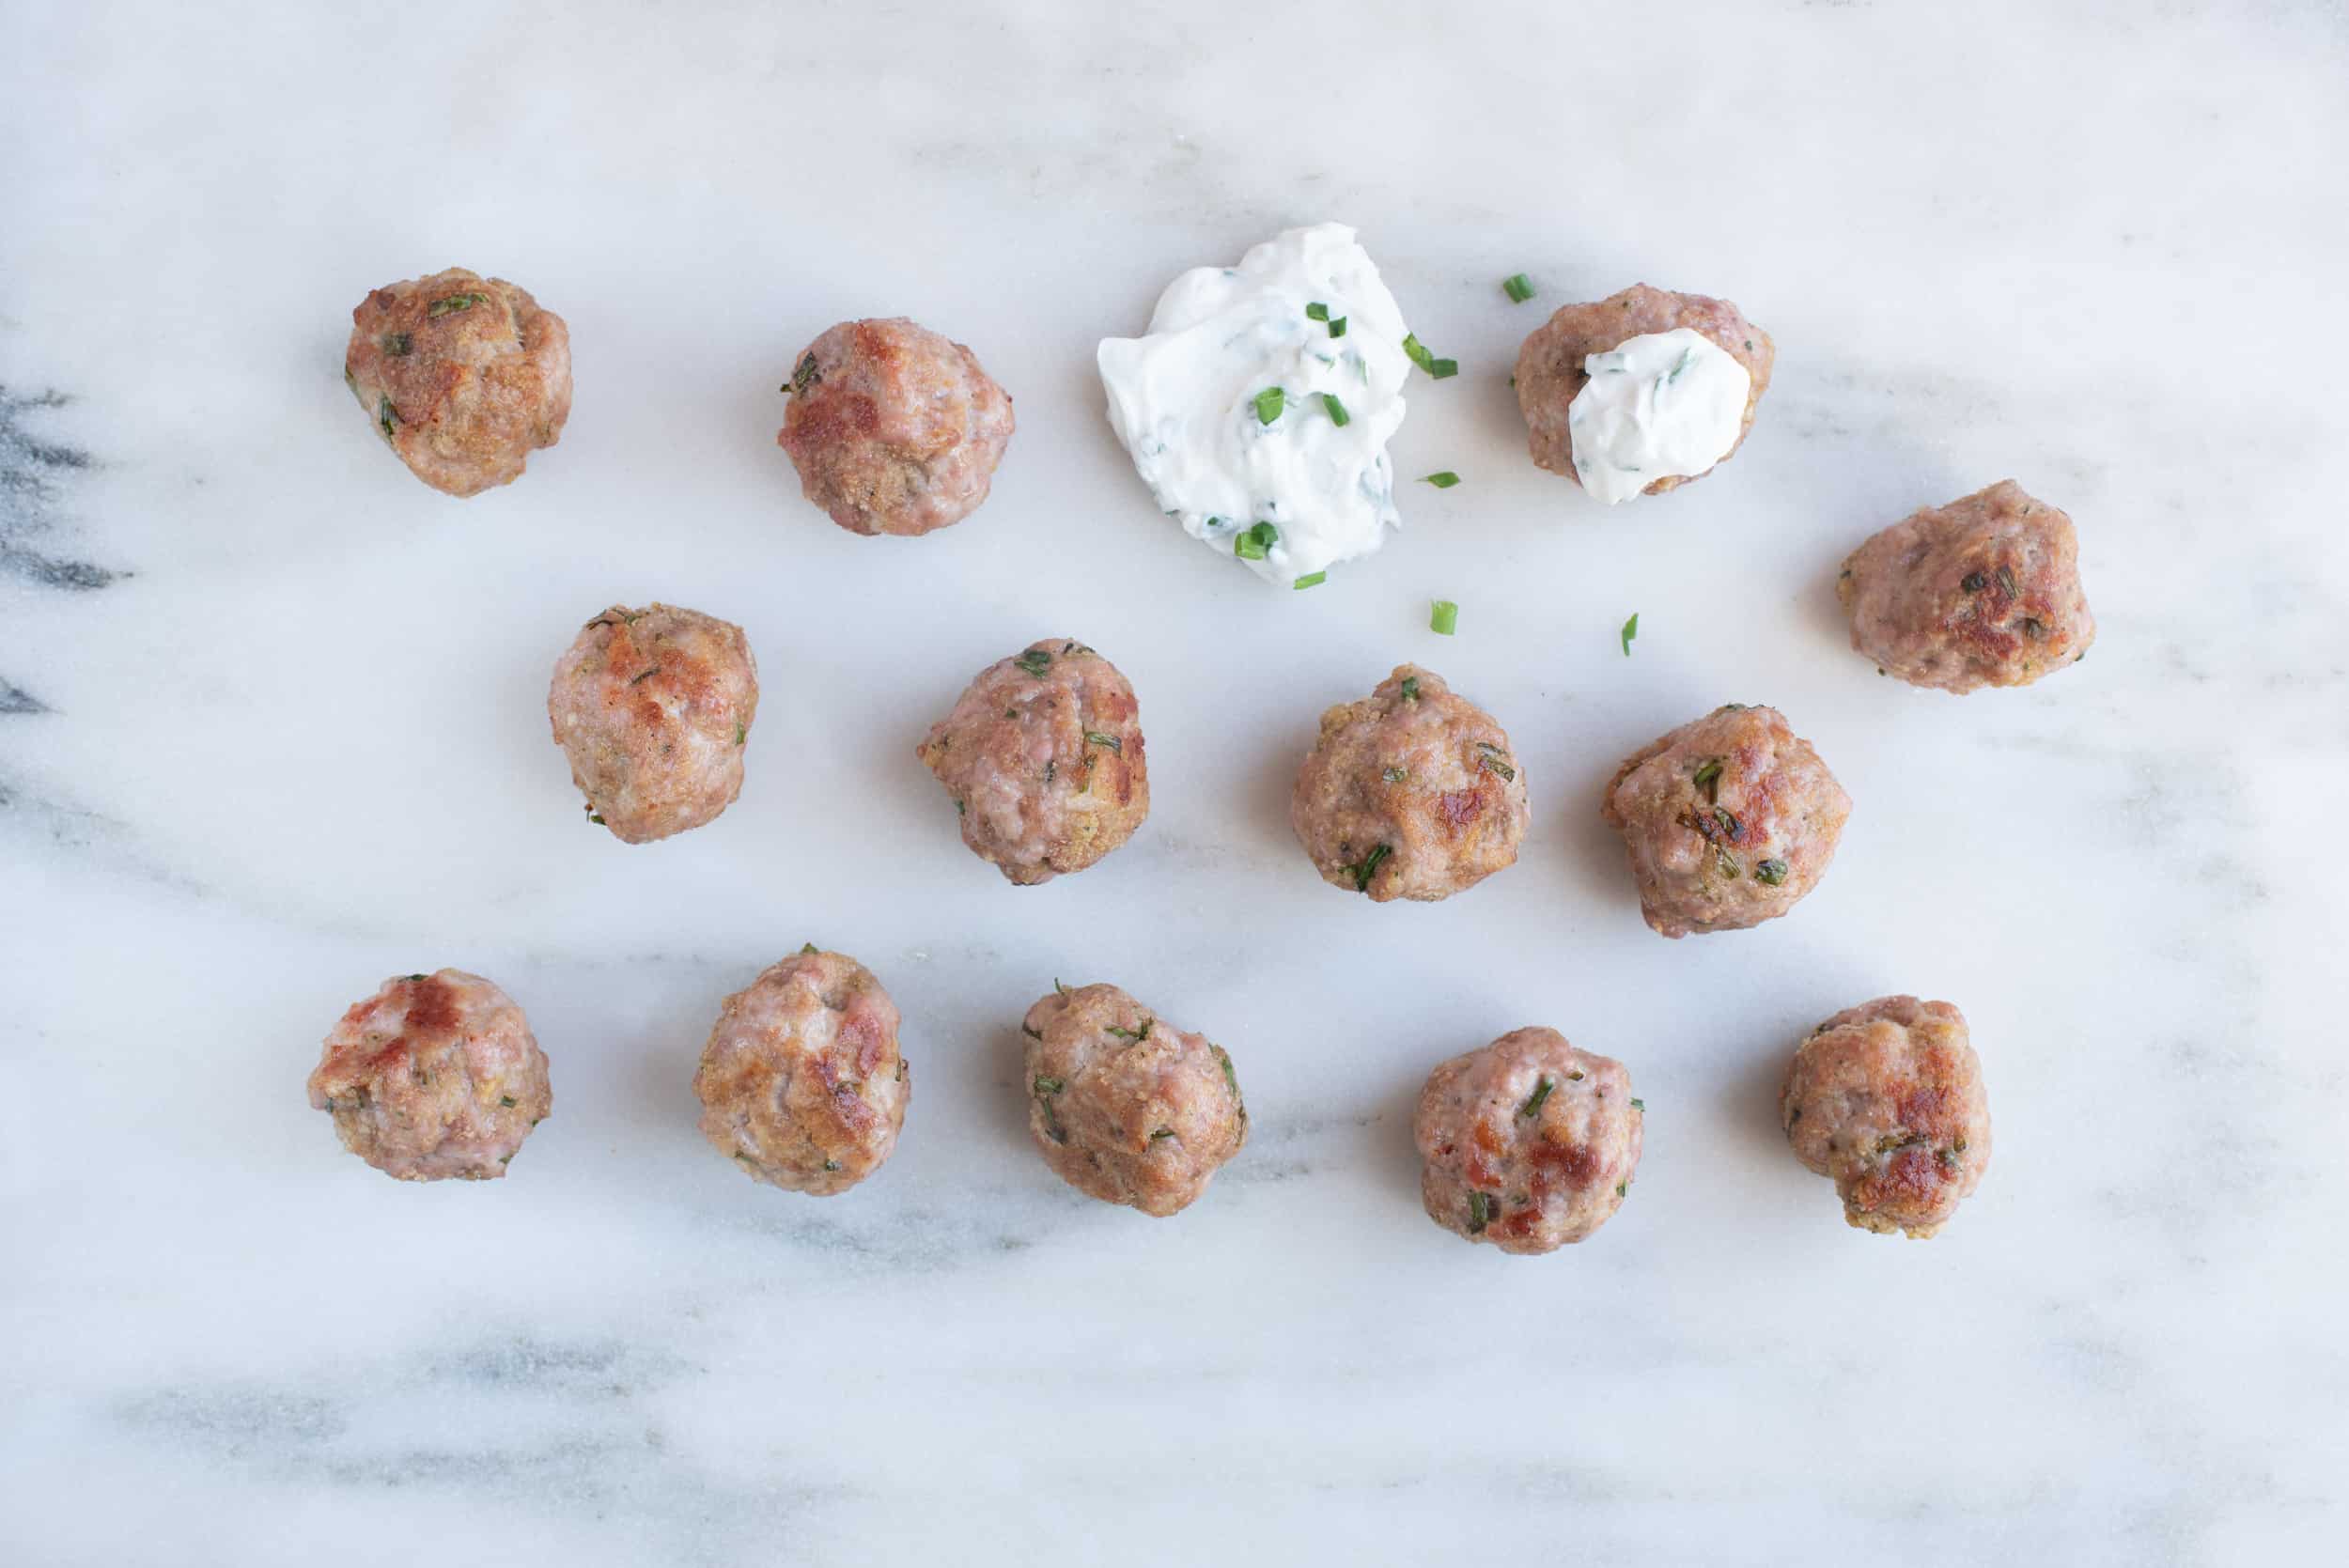 fourteen small round meatballs, a few sprinkled with chopped green chives and two topped with yogurt